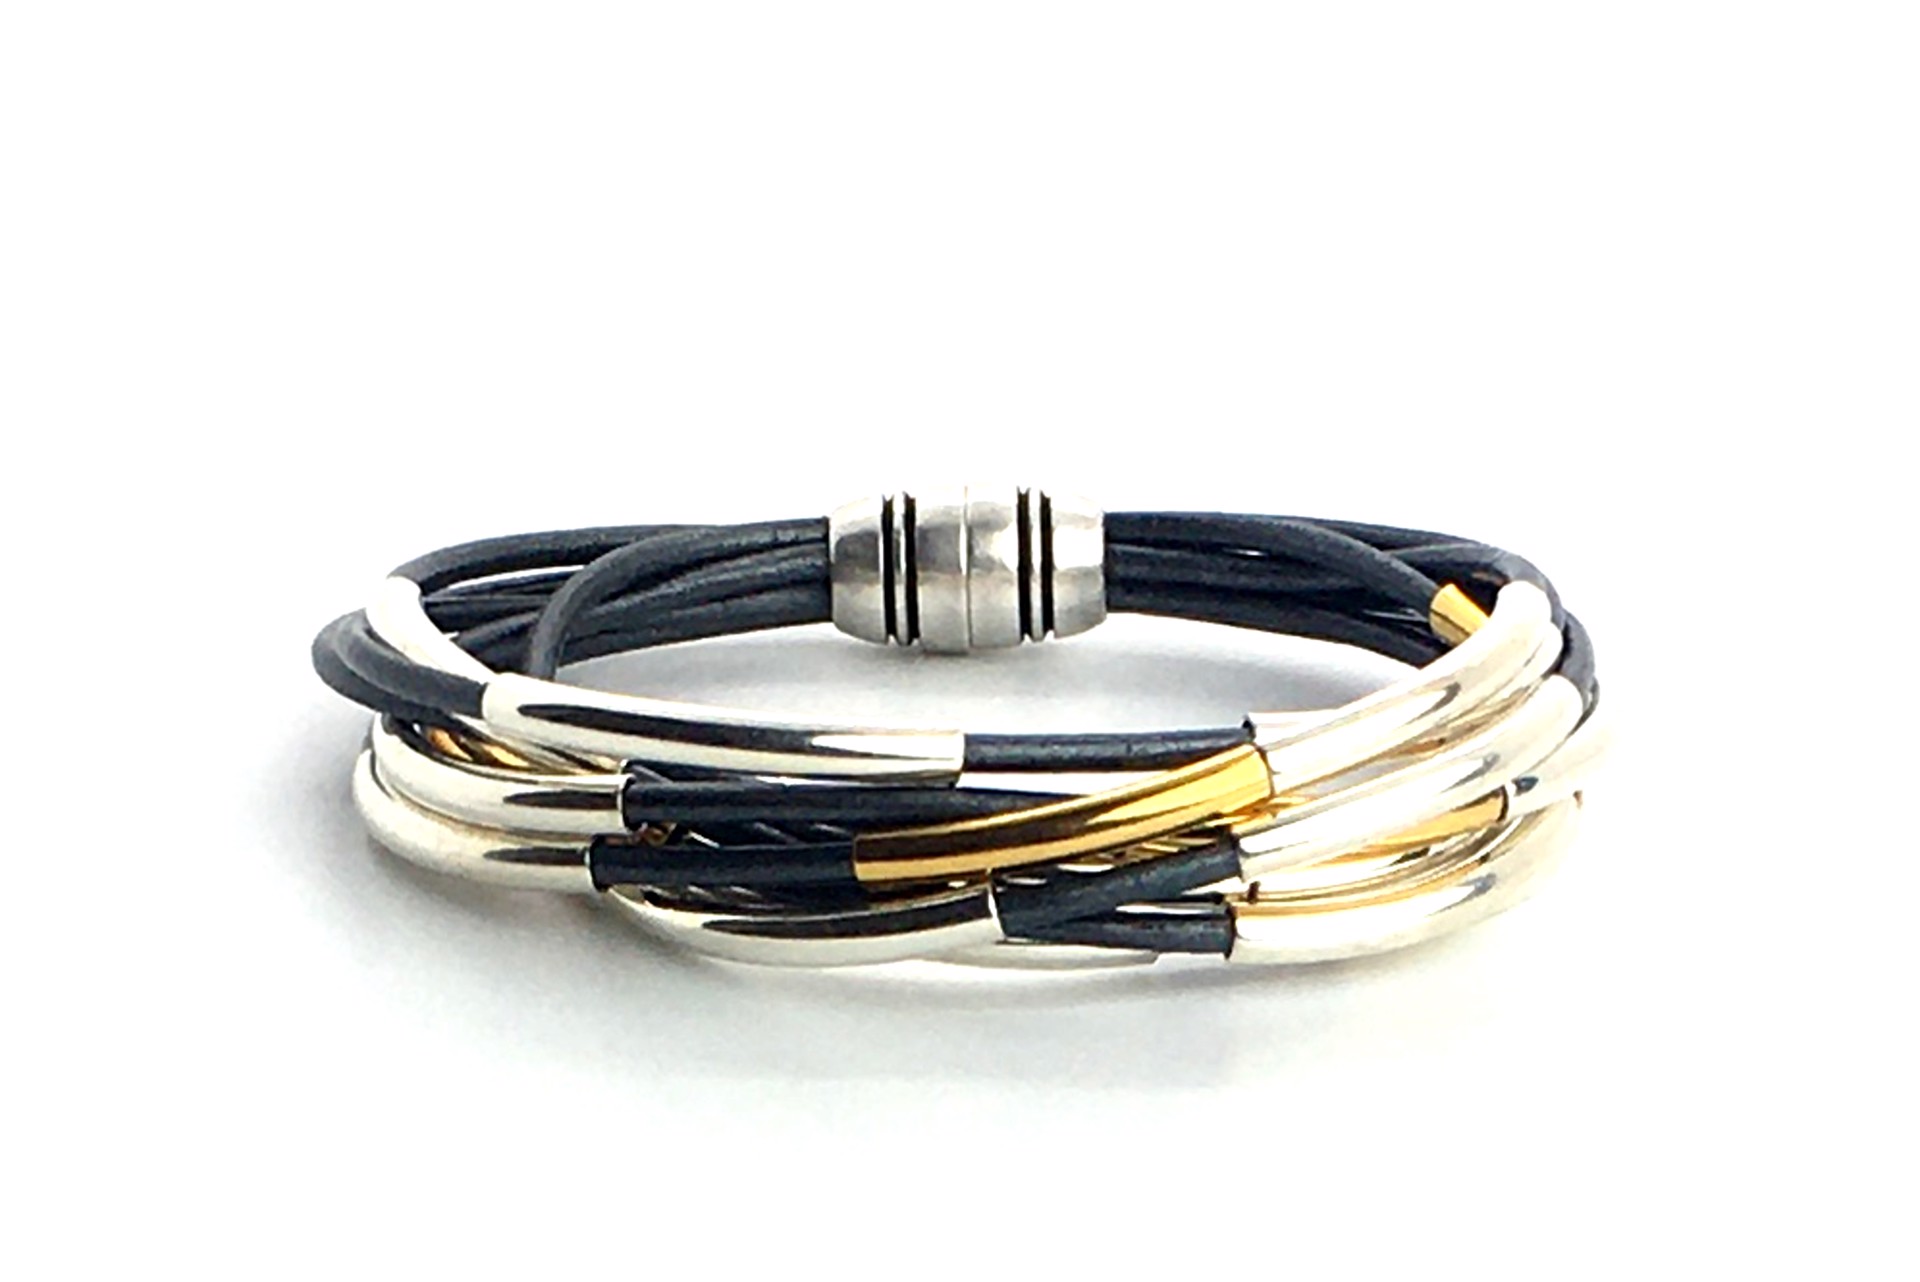 Teal Leather Bracelet with Silver Plated Tubes, Gold Accents and Magnetic Silver Clasp  by Suzanne Woodworth